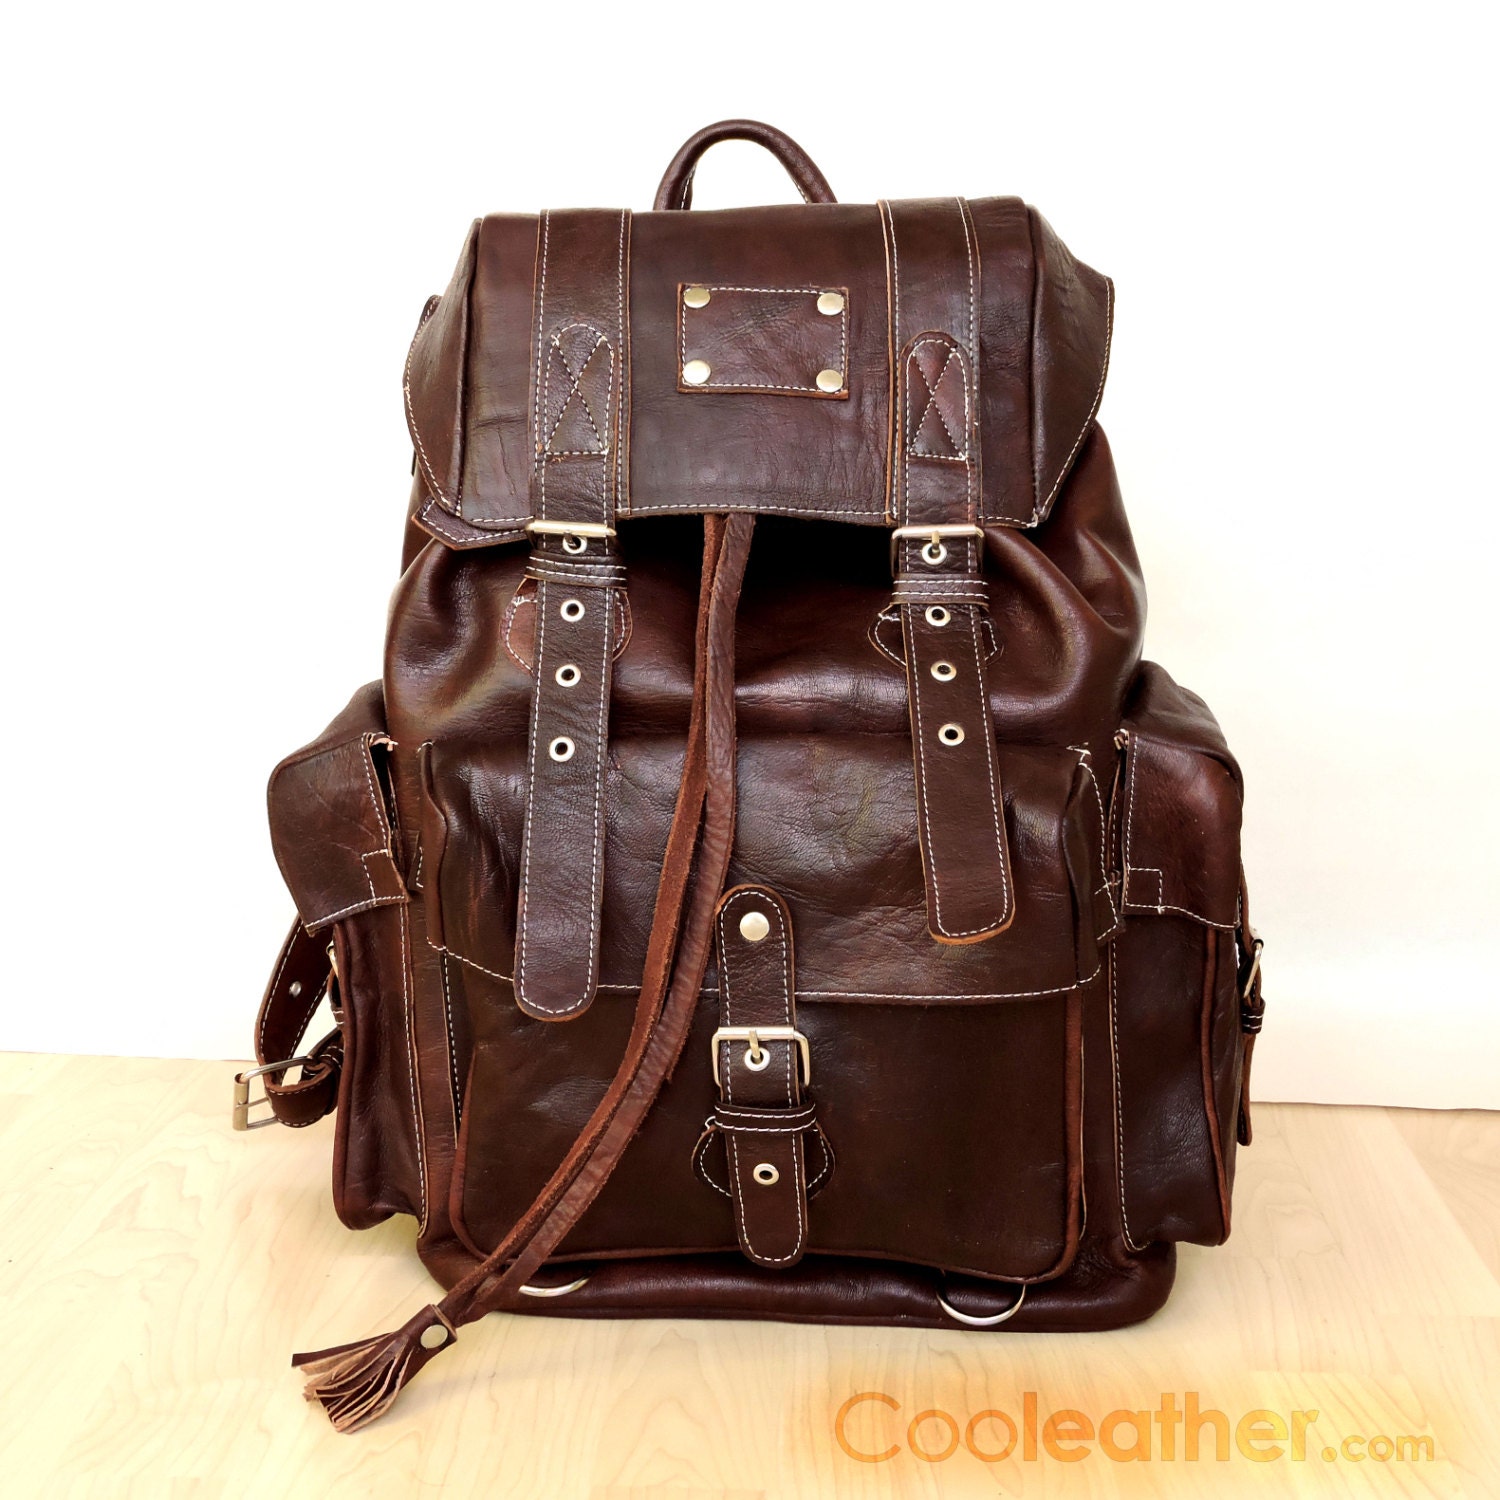 Extra Large Innovative Leather Hiking Backpack by Cooleather